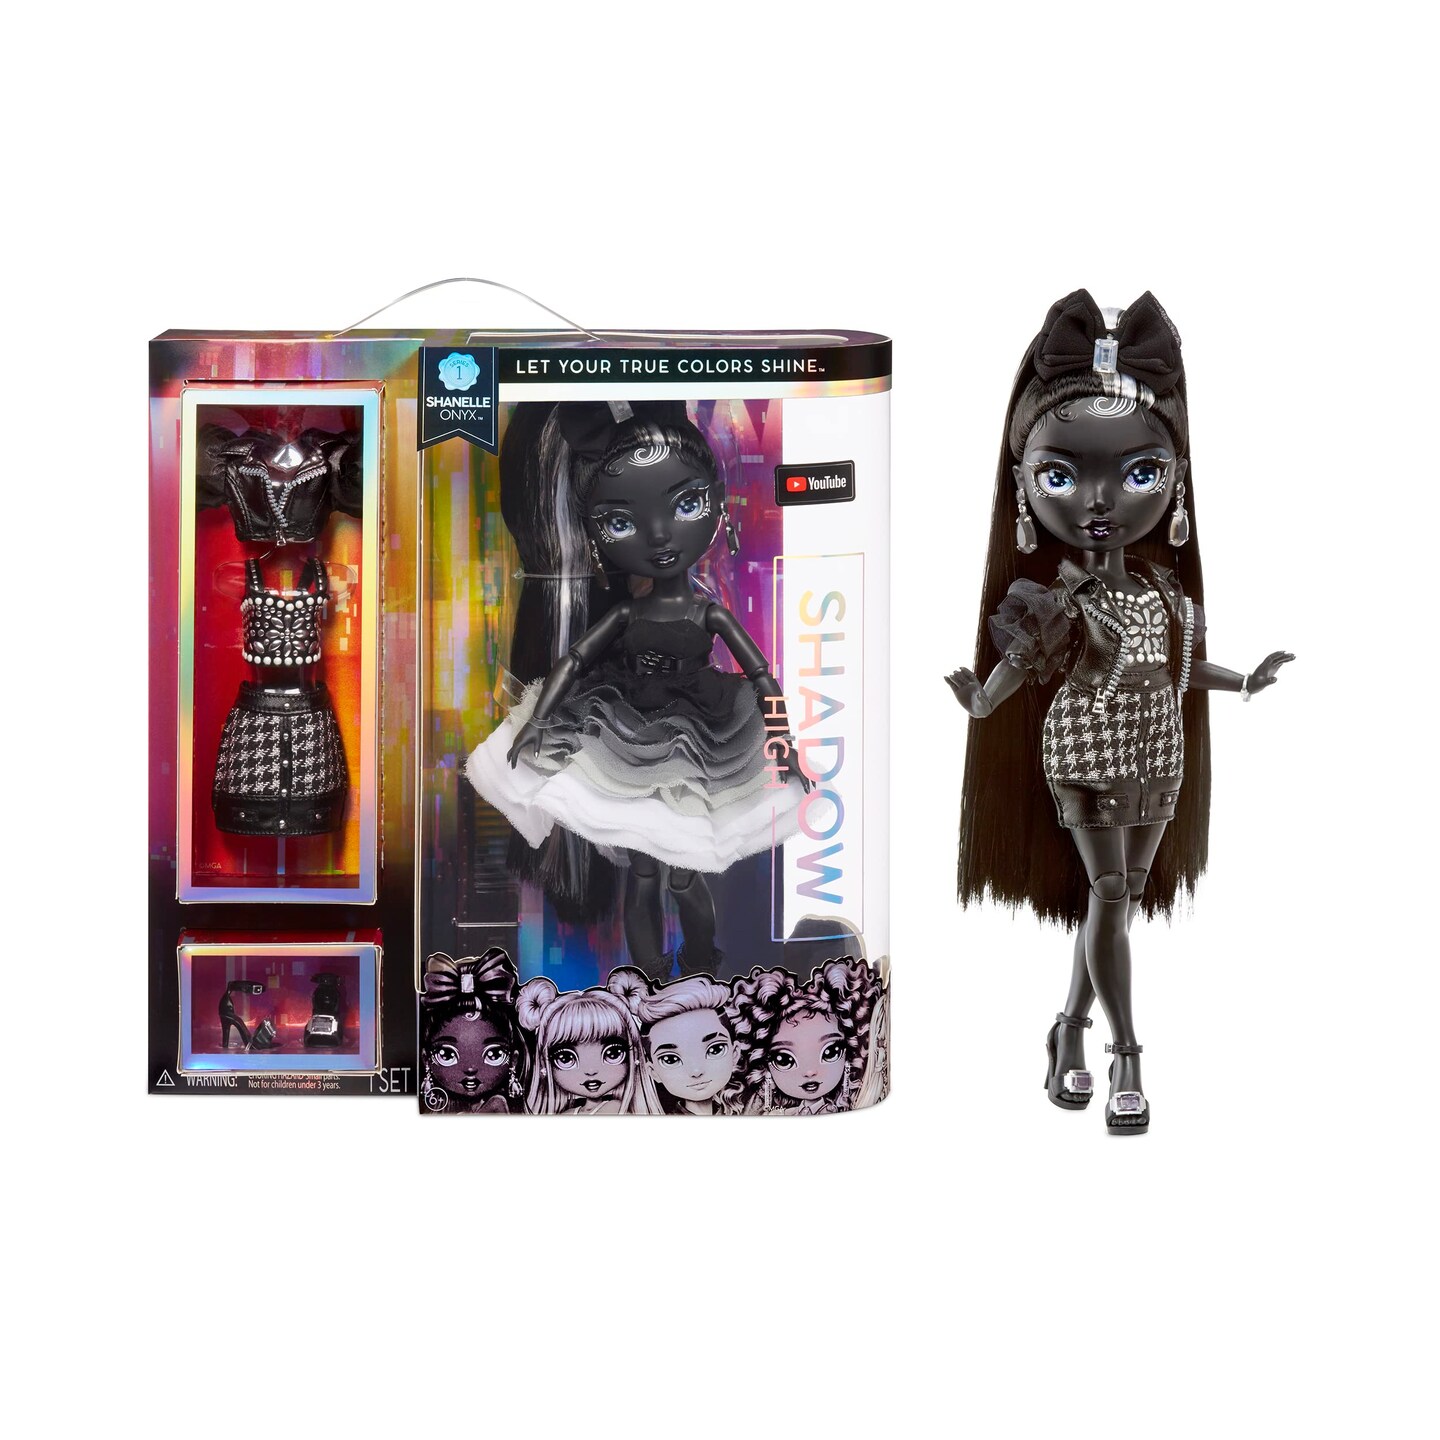 Rainbow High Shadow Series 1 Shanelle Onyx- Grayscale Fashion Doll. 2 Black  Designer Outfits to Mix & Match with Accessories, Great Gift for Kids 6-12  Years Old and Collectors, Multicolor, 583554EUC